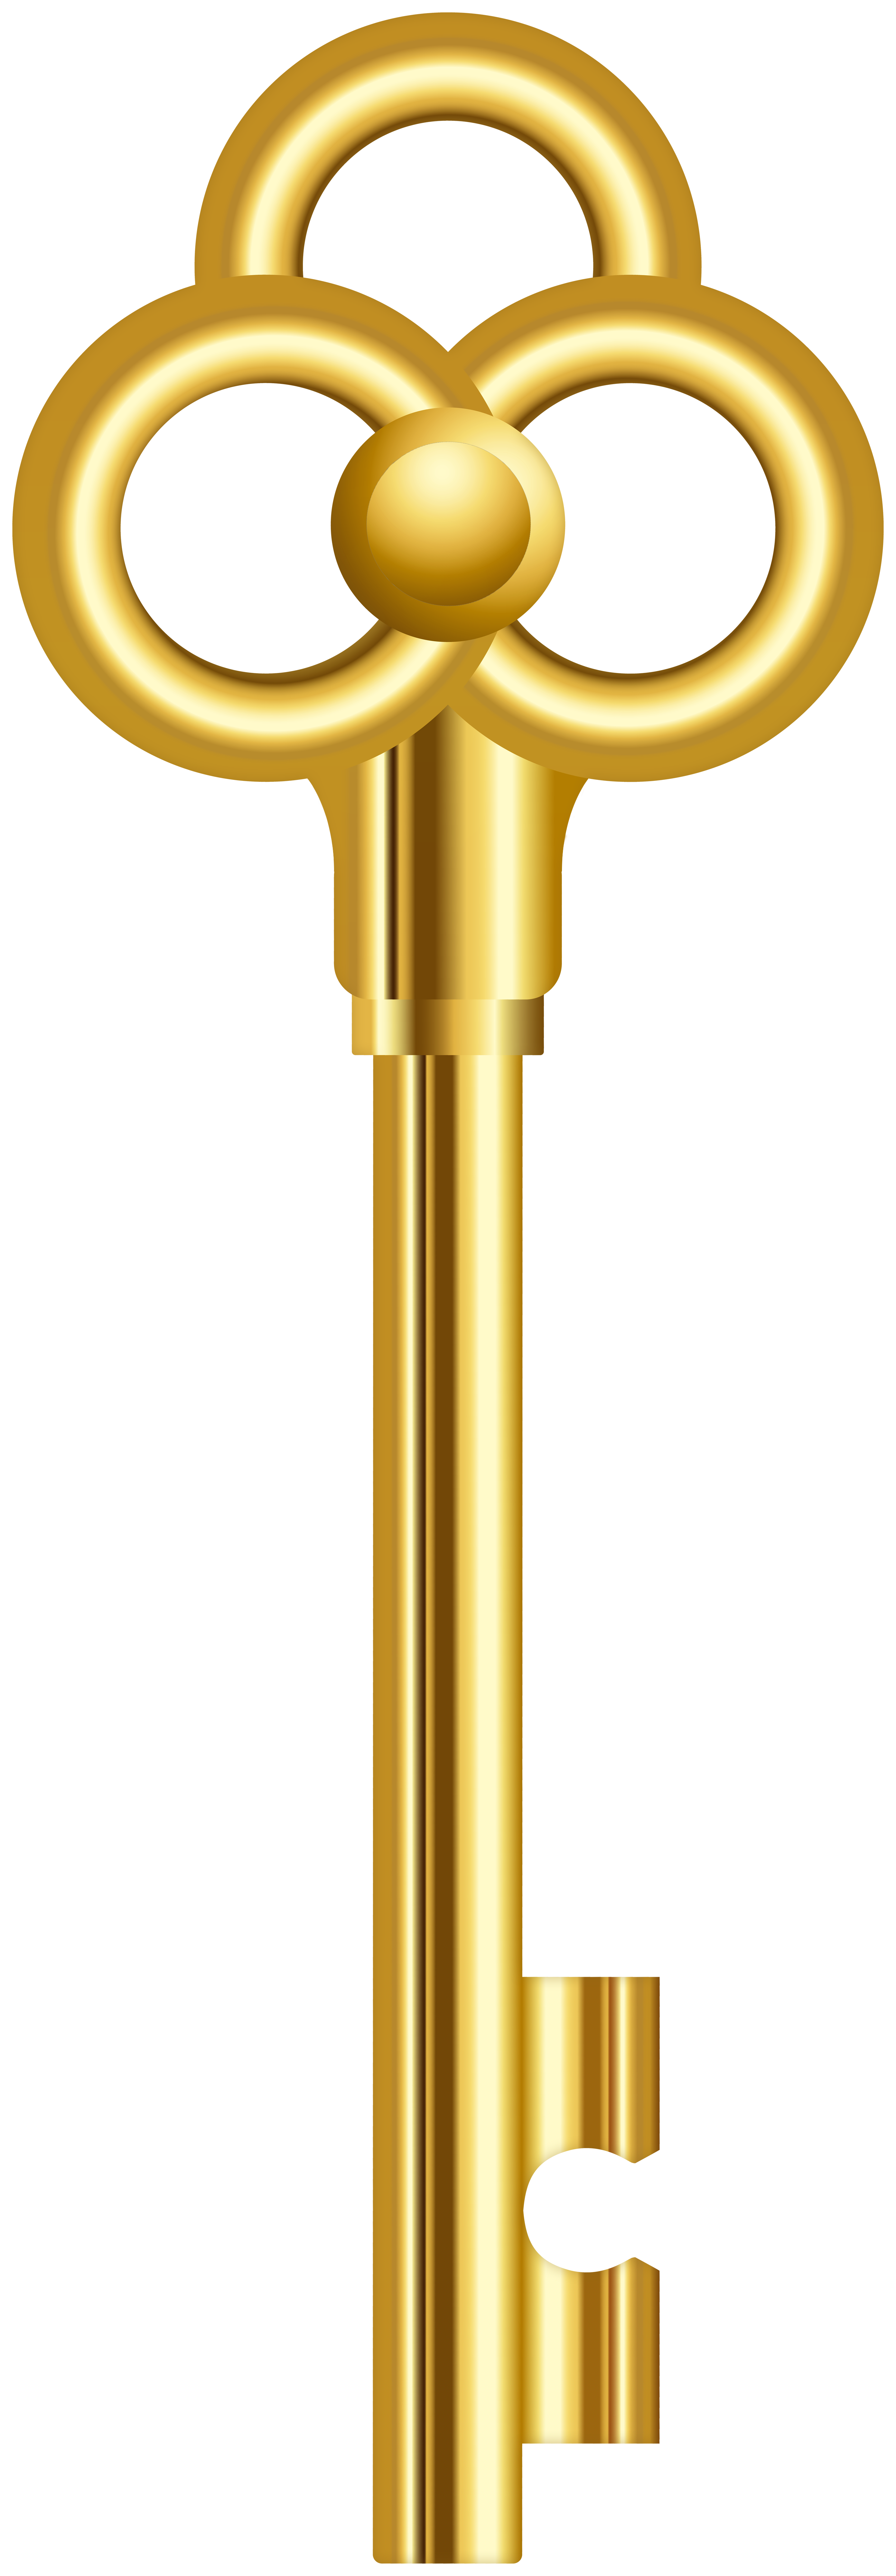 Gold Key Clip Art Images And Photos Finder